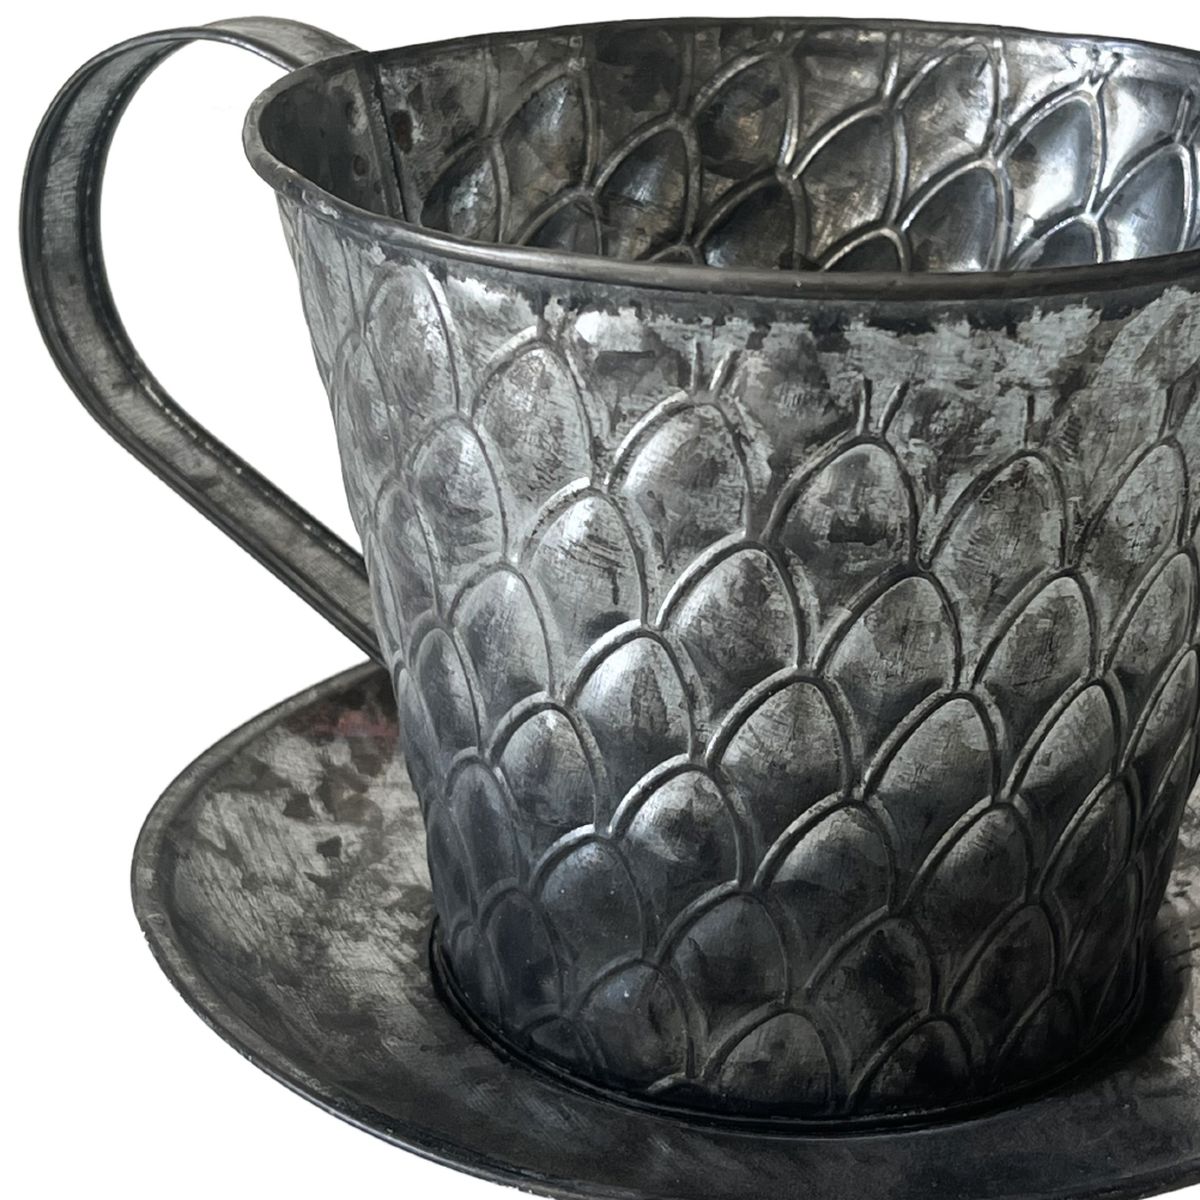 Flower pot cover in zinc in the shape of a cup